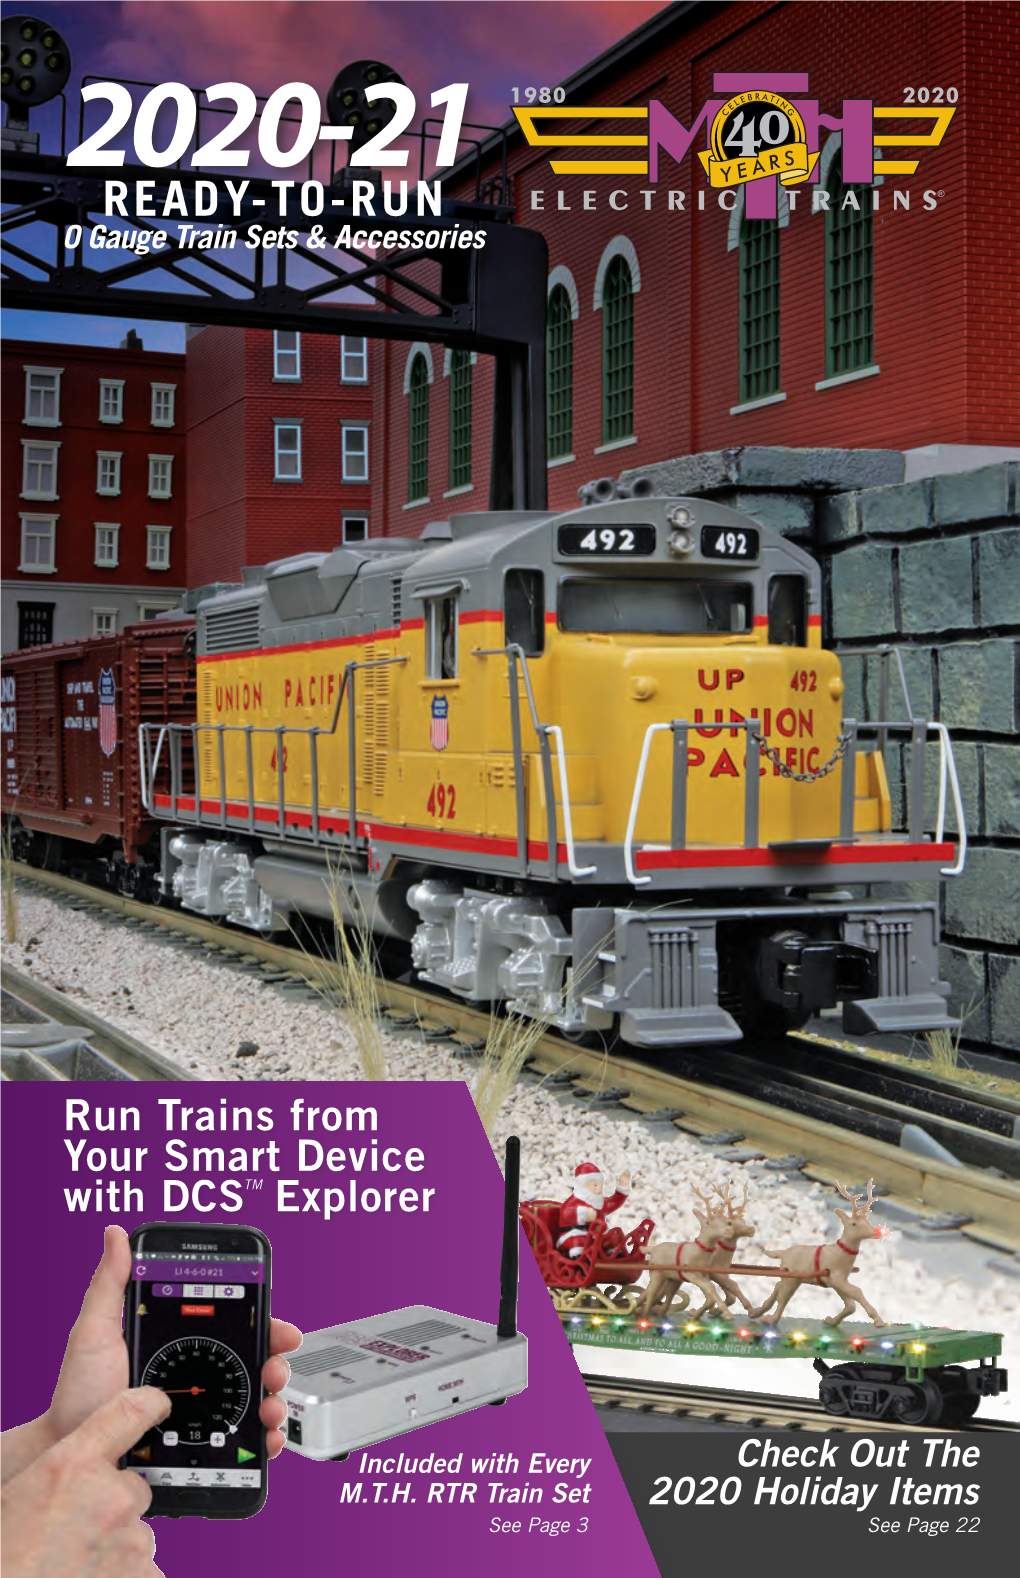 READY-TO-RUN O Gauge Train Sets & Accessories